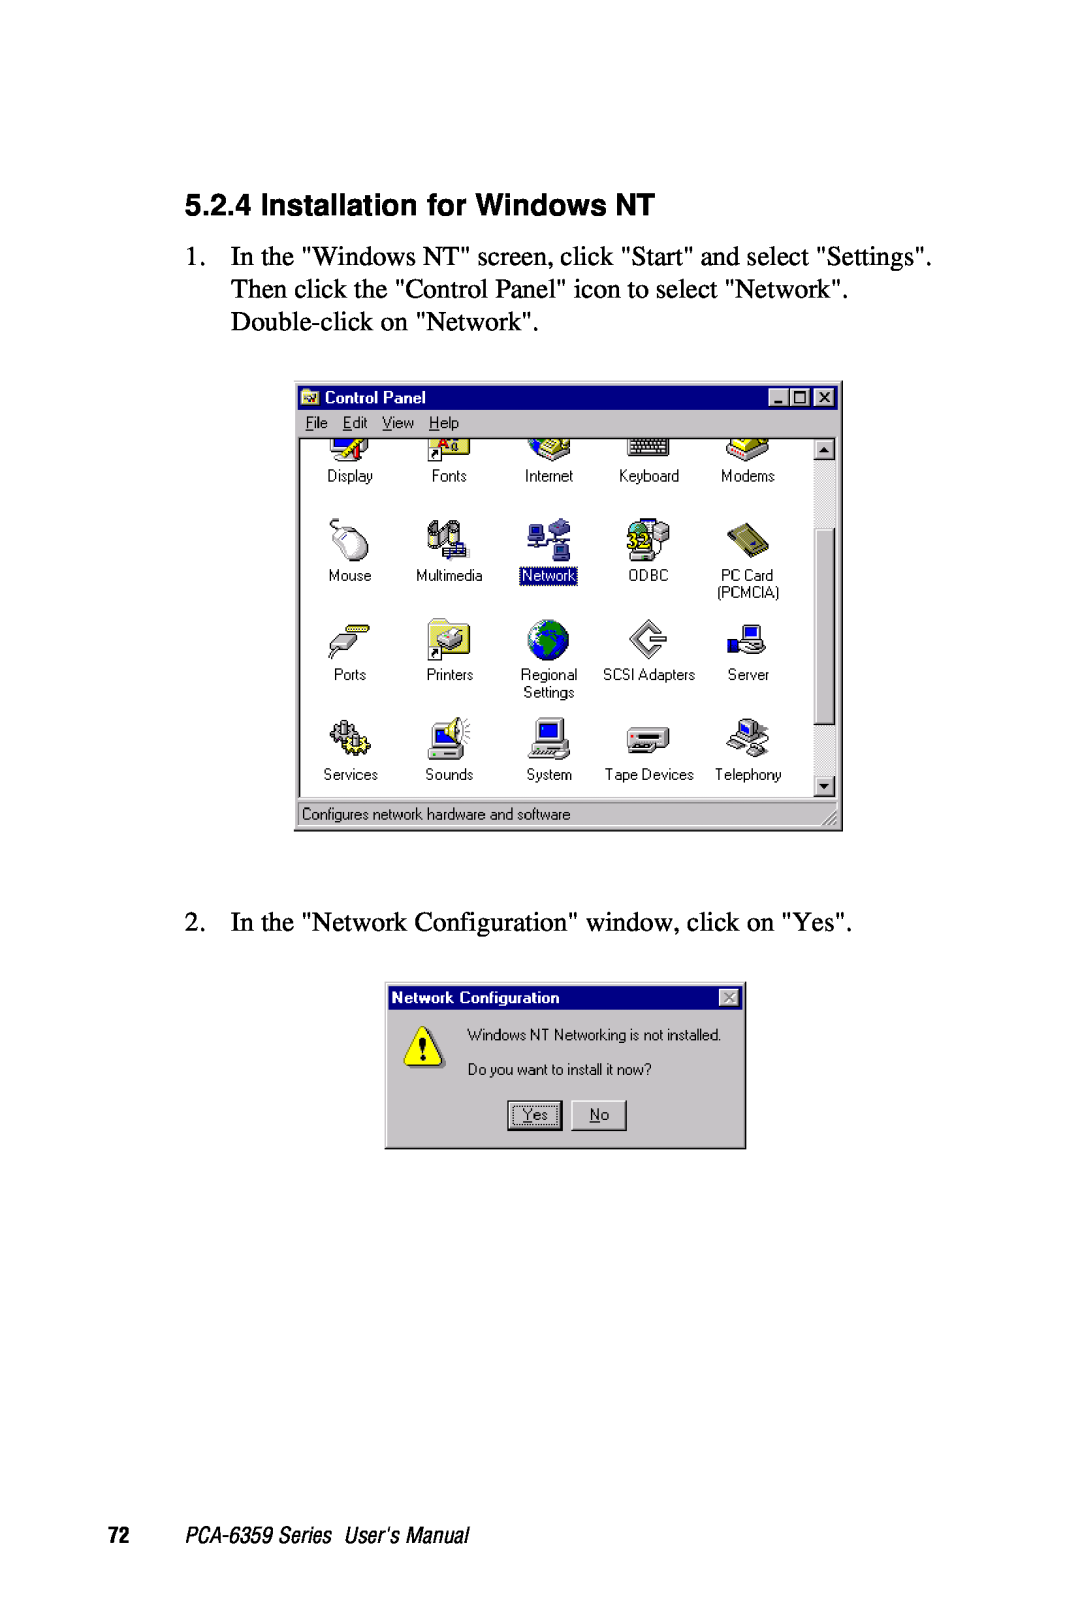 Advantech PCA-6359 user manual Installation for Windows NT, In the Network Configuration window, click on Yes 